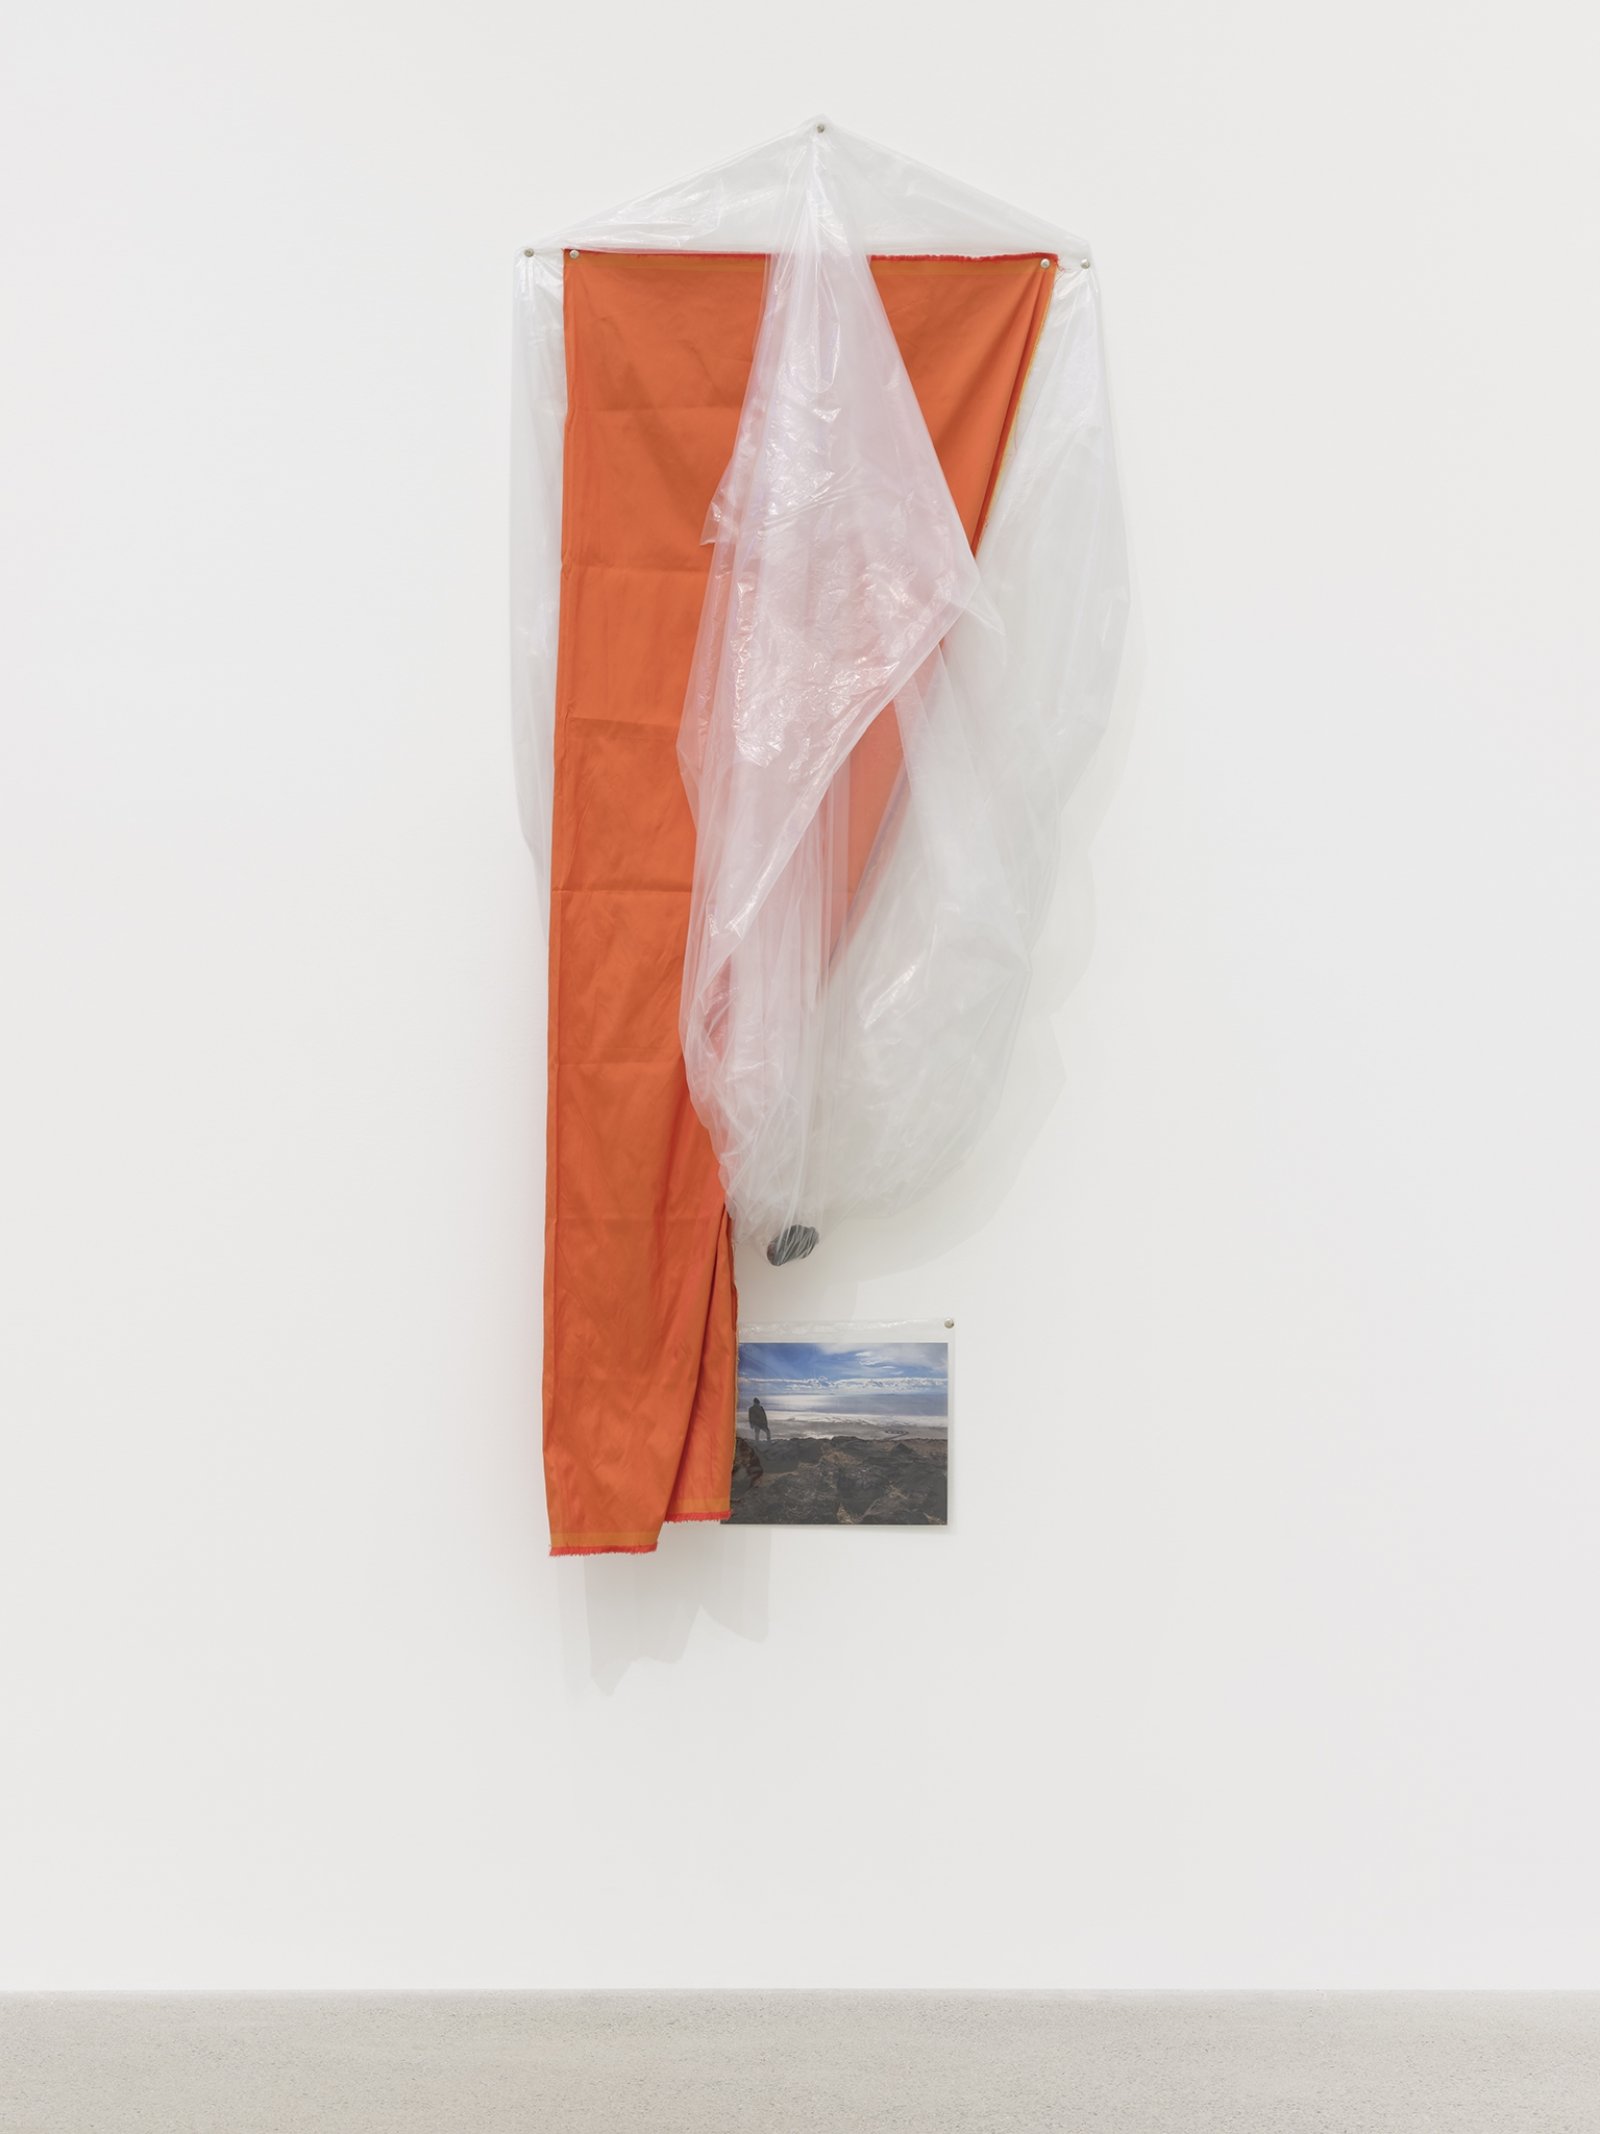 Duane Linklater, coup, 2016, plastic sheeting, polyester cloth, stone from Spiral Jetty, thumbtacks, colour photograph, 67 x 43 x 8 in. (170 x 109 x 20 cm)